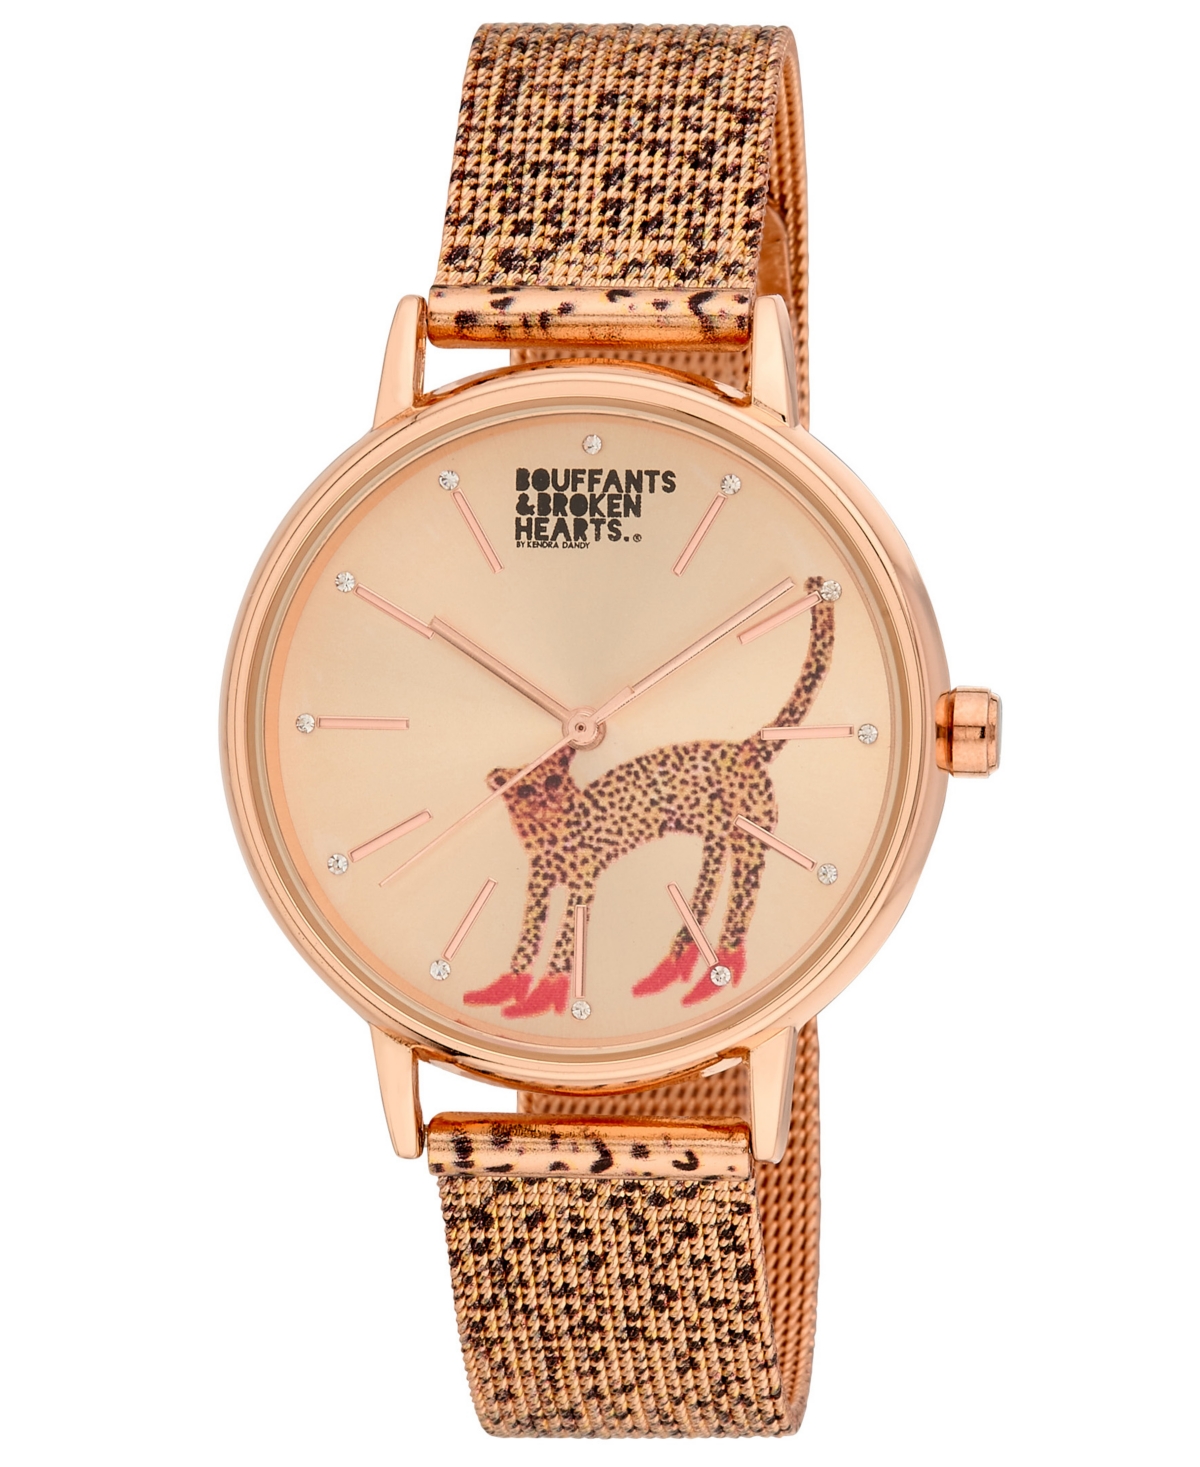 Women's Quartz Bouffants and Broken Hearts Rose Gold-Tone and Black Mesh Alloy Watch 36mm - Rose Gold